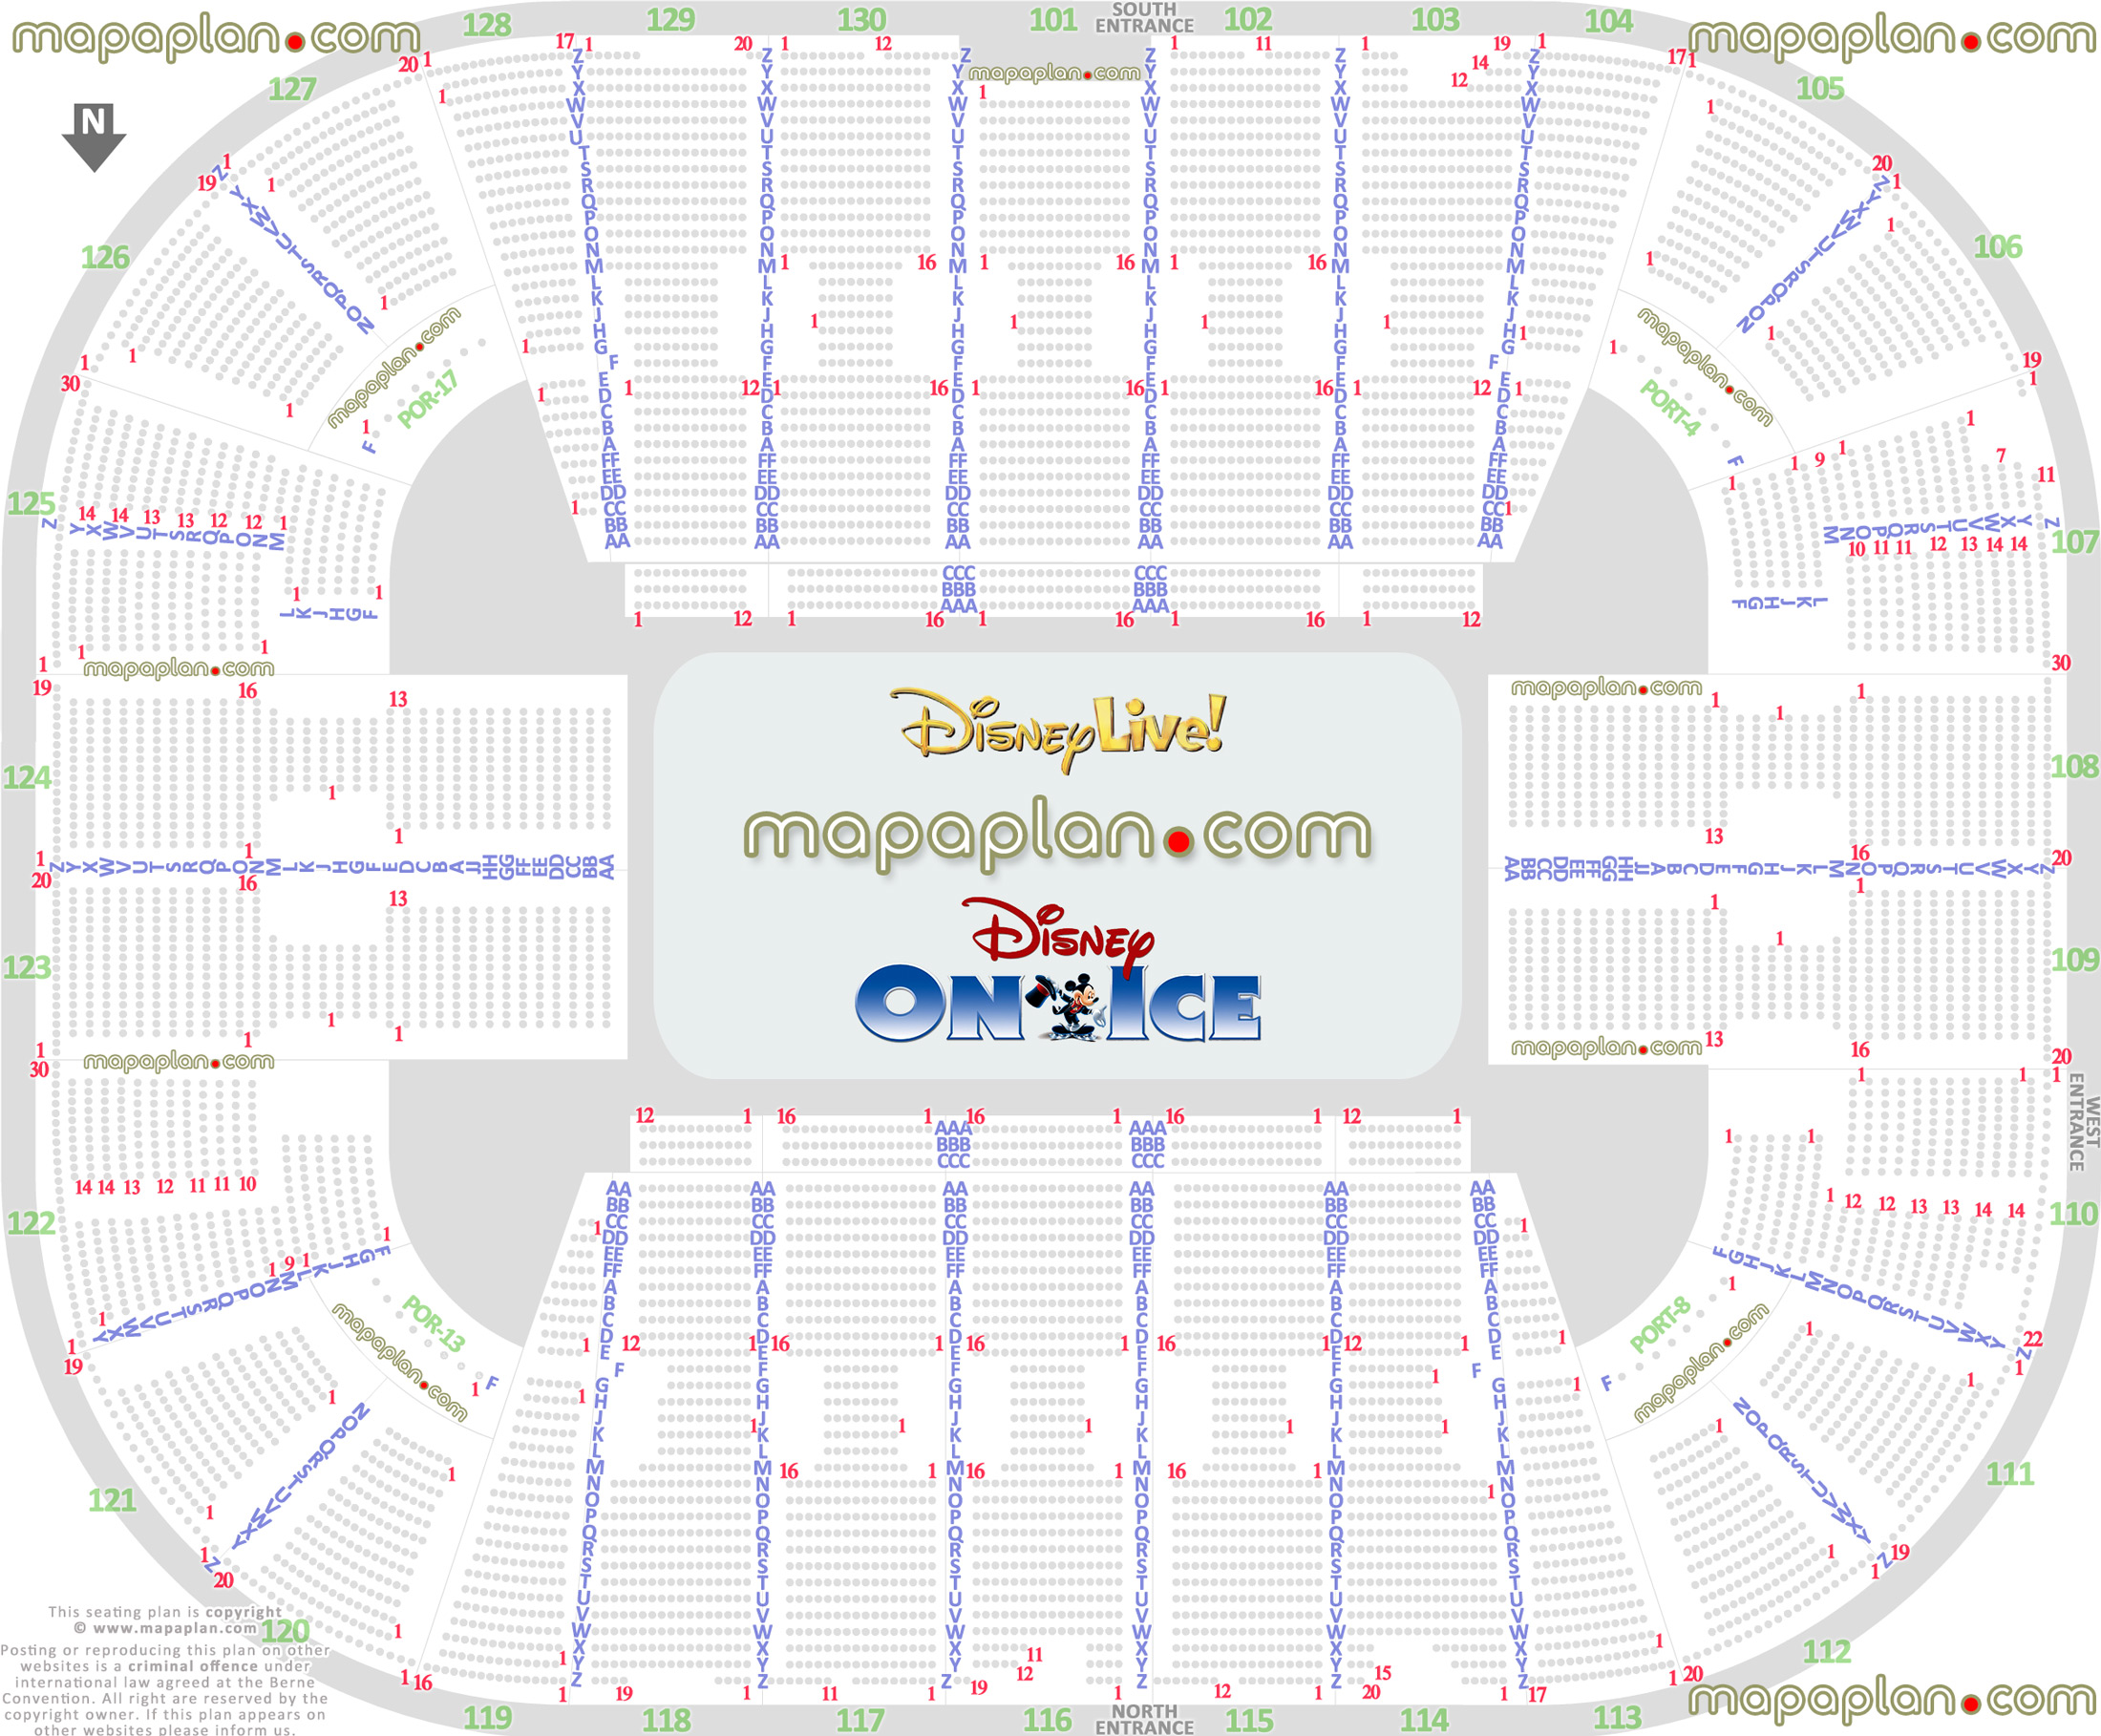 disney live disney ice patriot center fairfax virginia best seat finder 3d map arena tool precise detailed aisle seat row numbering location data plan ice rink event floor level chart full exact upper concourse level diagram Fairfax EagleBank Arena seating chart